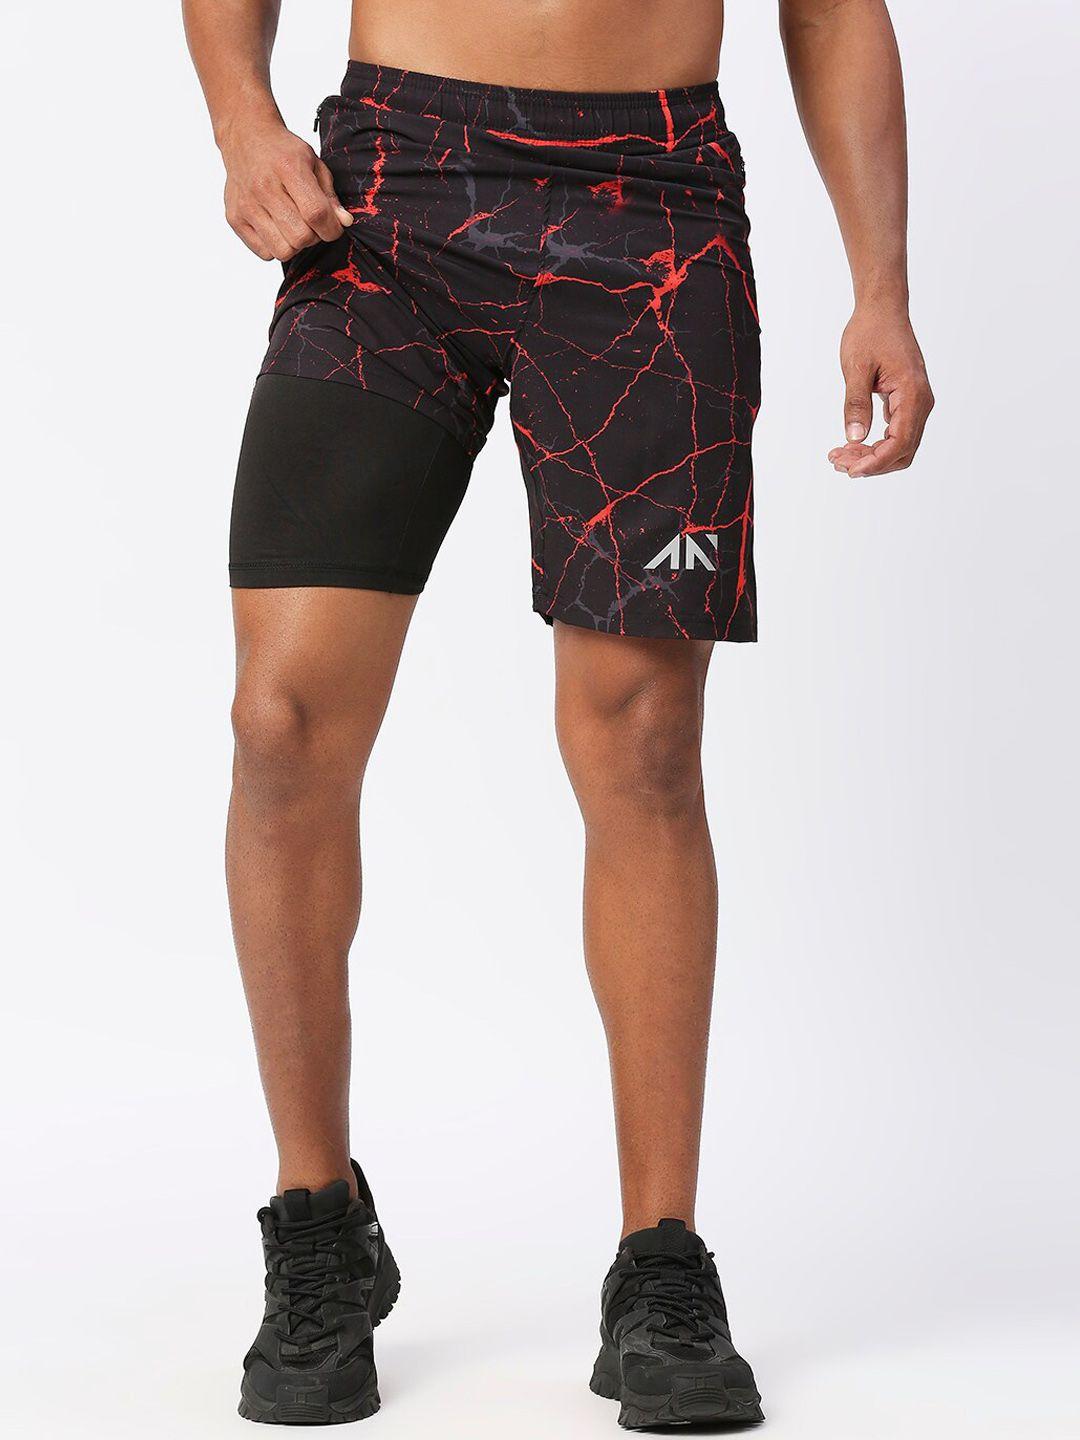 aesthetic nation men printed slim fit rapid-dry training or gym sports shorts